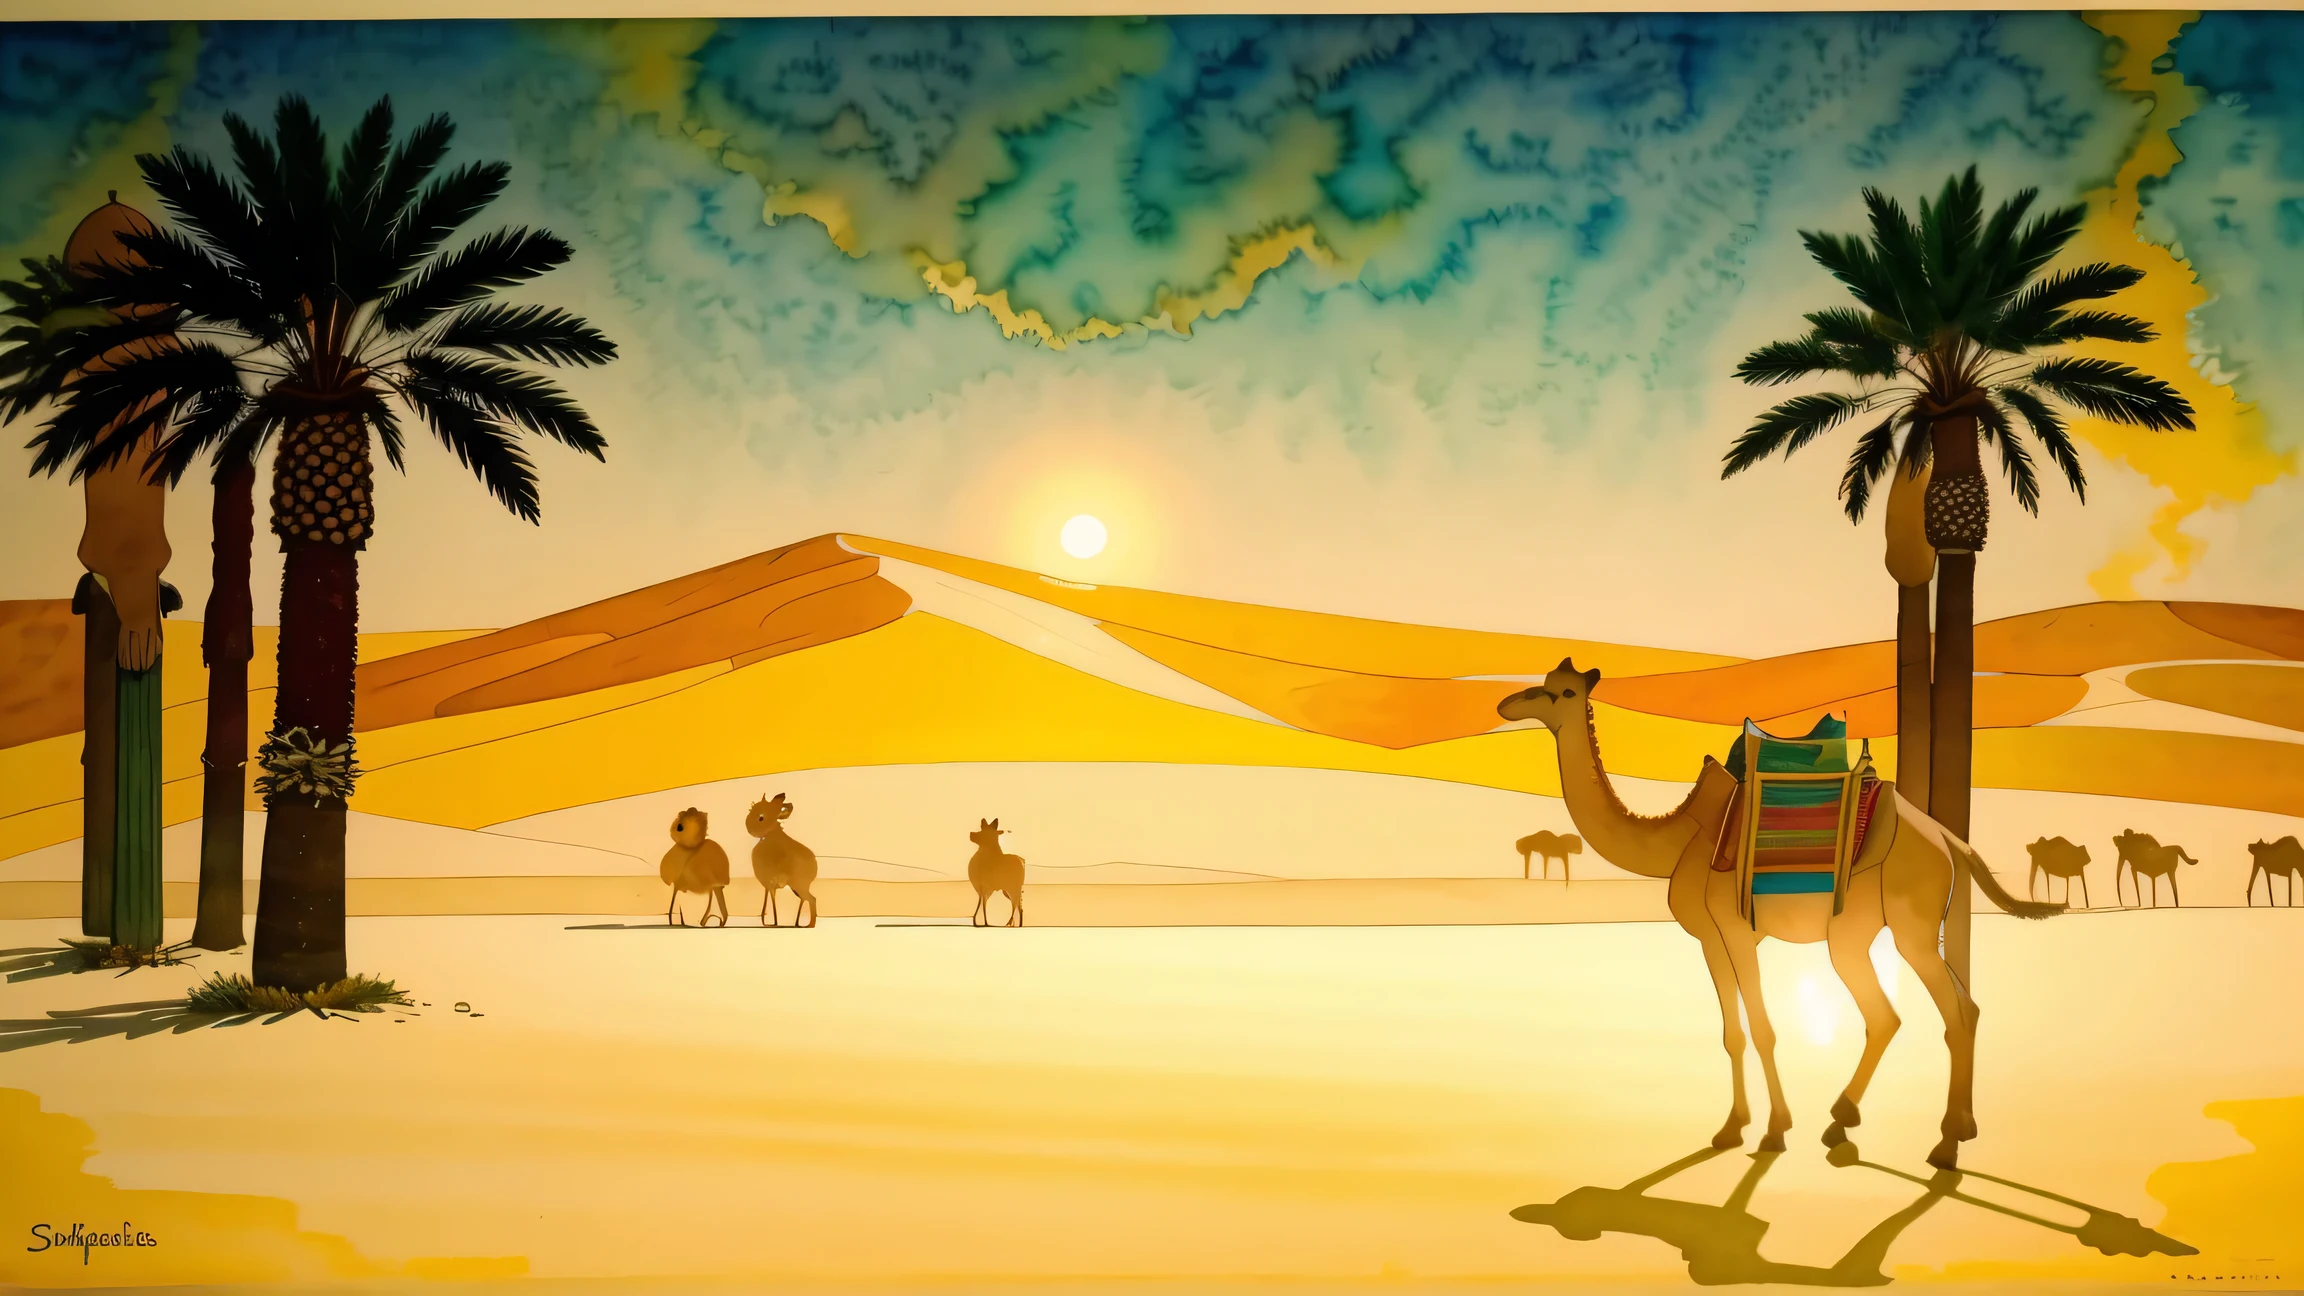 Arabia, a person standing next to a couple of camels outdoors, palm tree, desert landscape, palm_tree, horse, outdoors, old buildings, sand, house, modern art, painting, drawing, watercolor, psychedelic colors